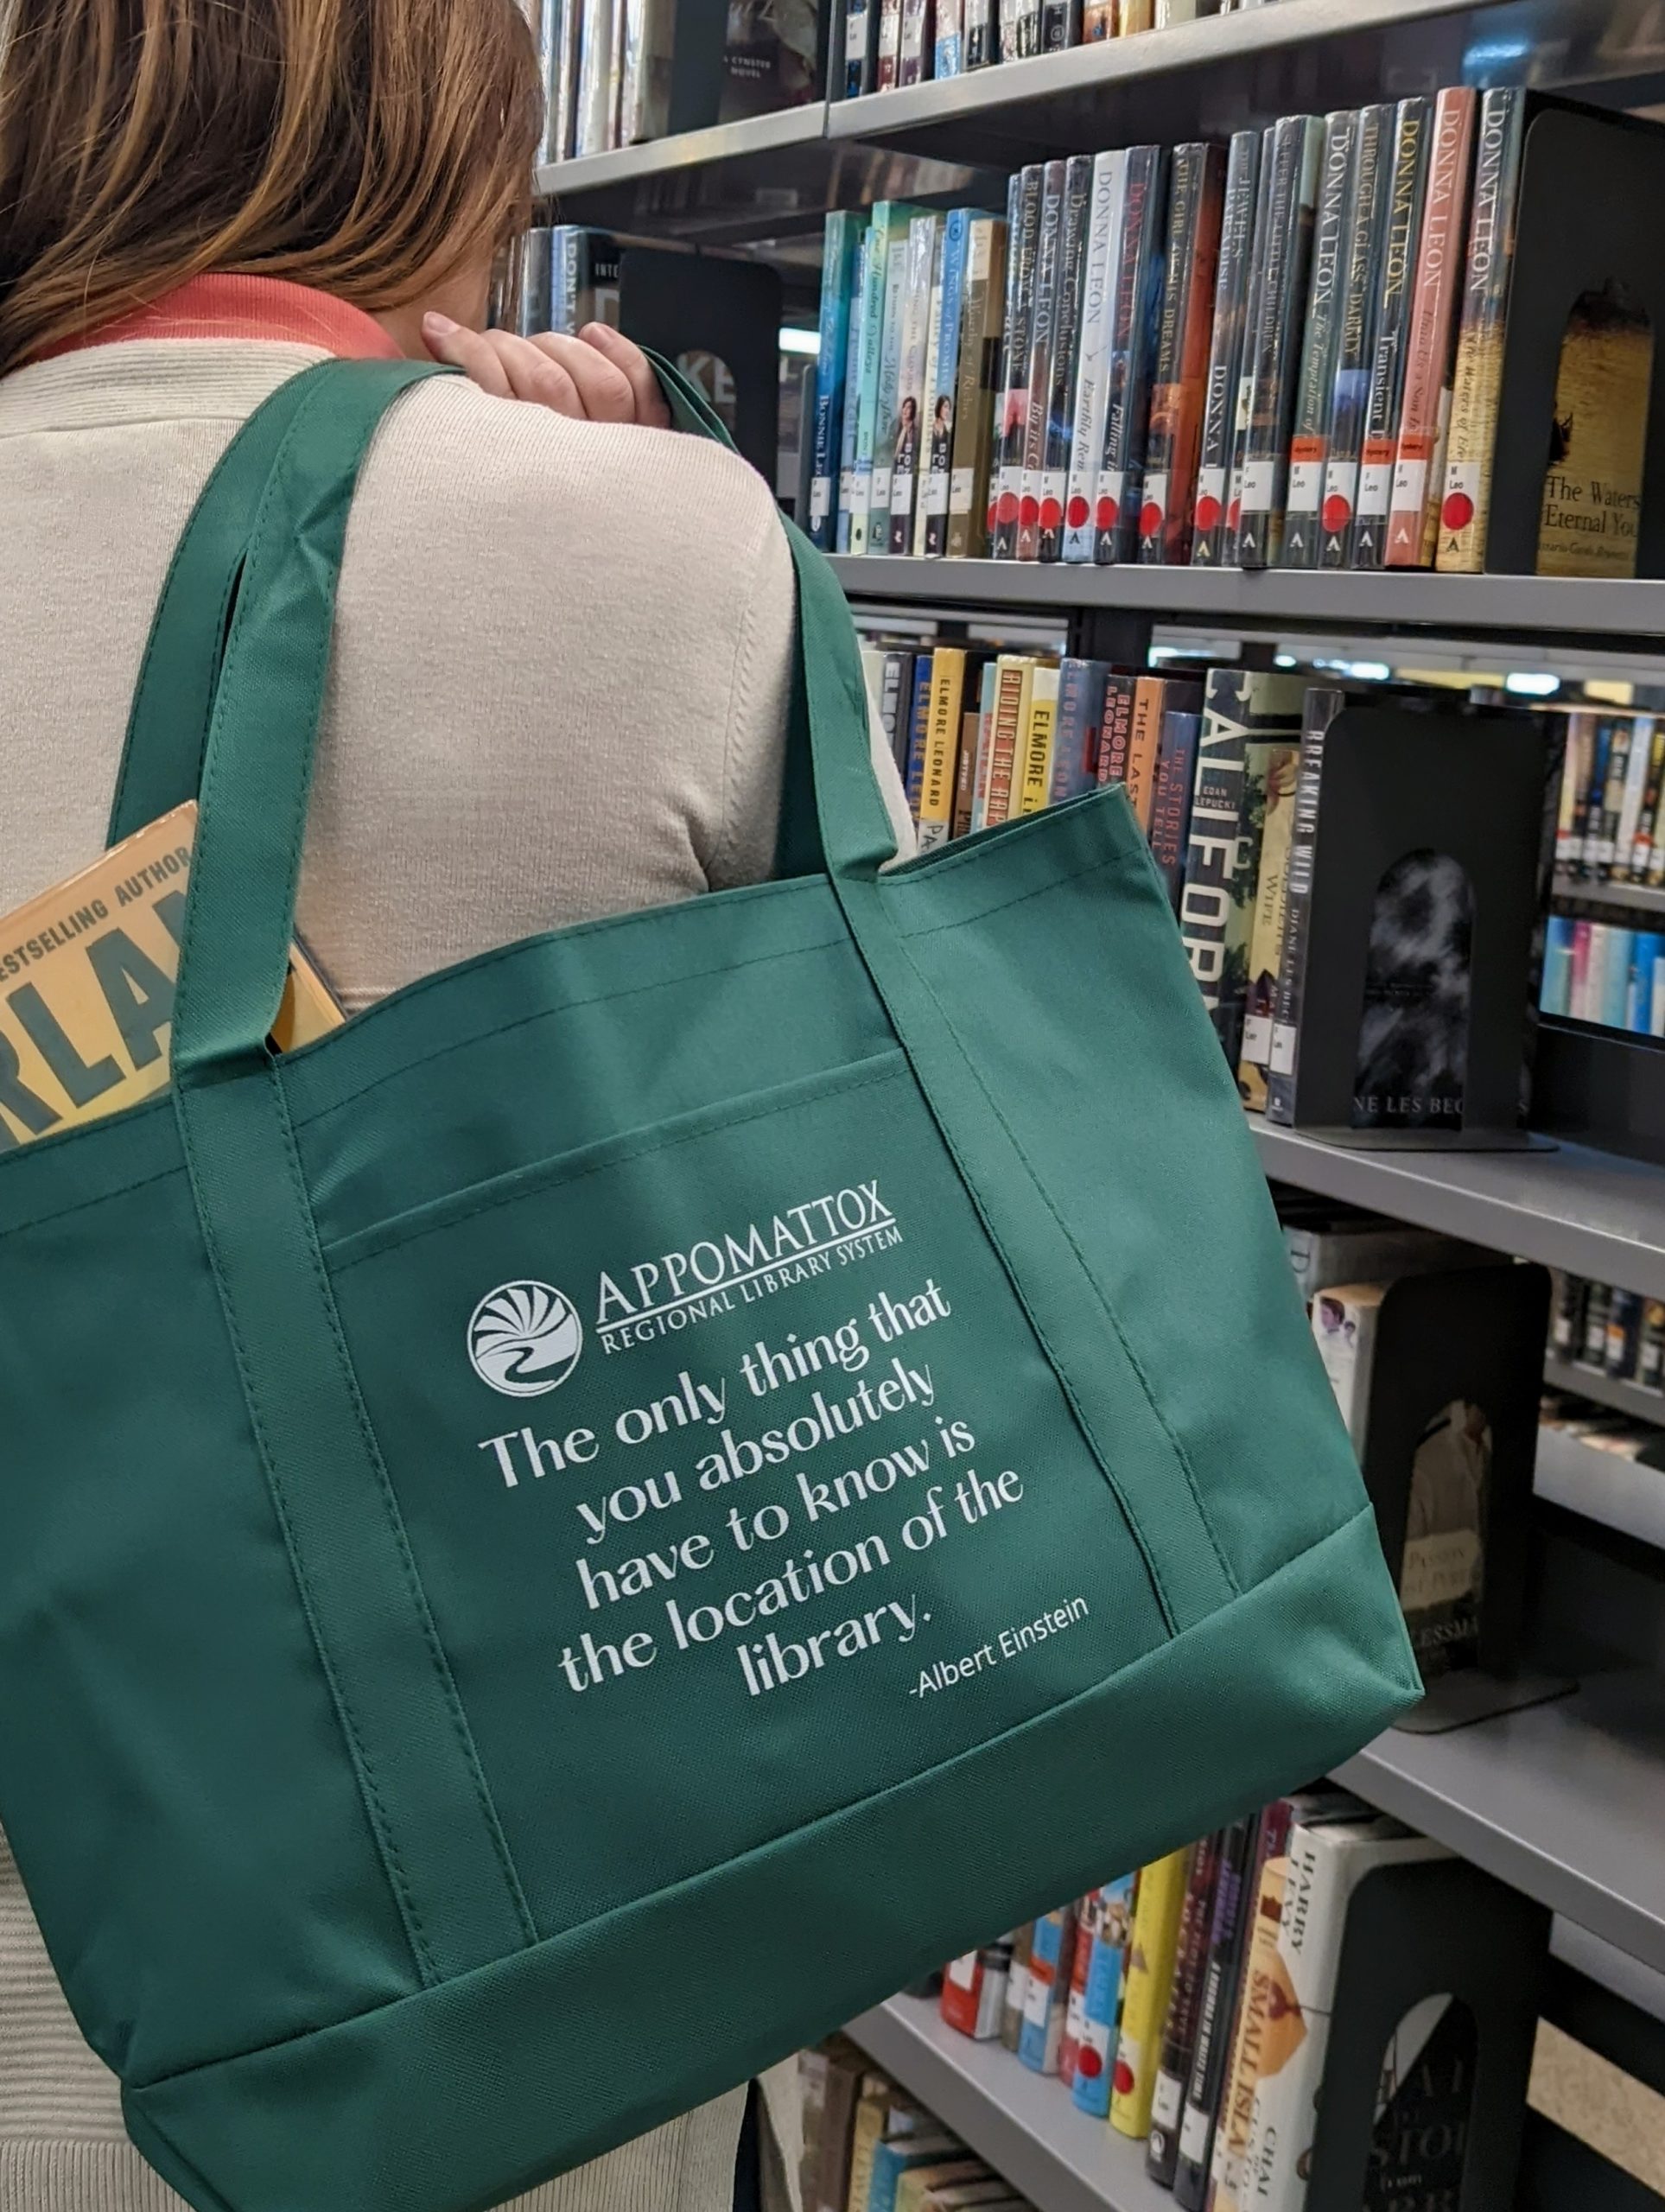 A woman standing in front of a library bookshelf carrying a green tote bag with a library quote on it. Peaking out of the bag is a book.